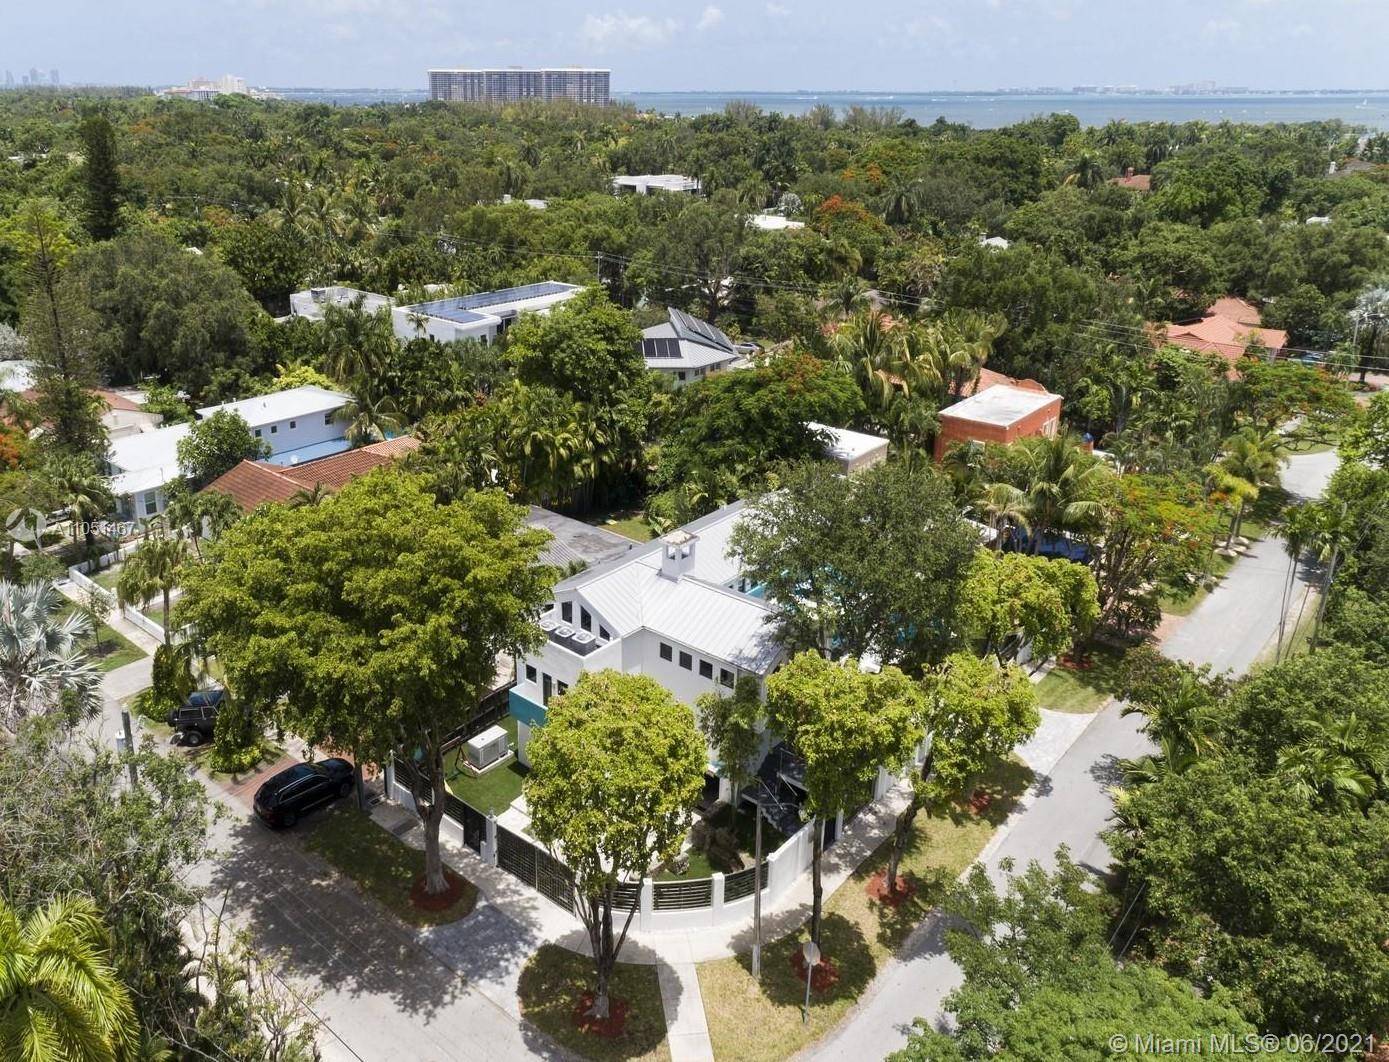 One of a kind Modern Estate in the Heart of Coconut Grove.